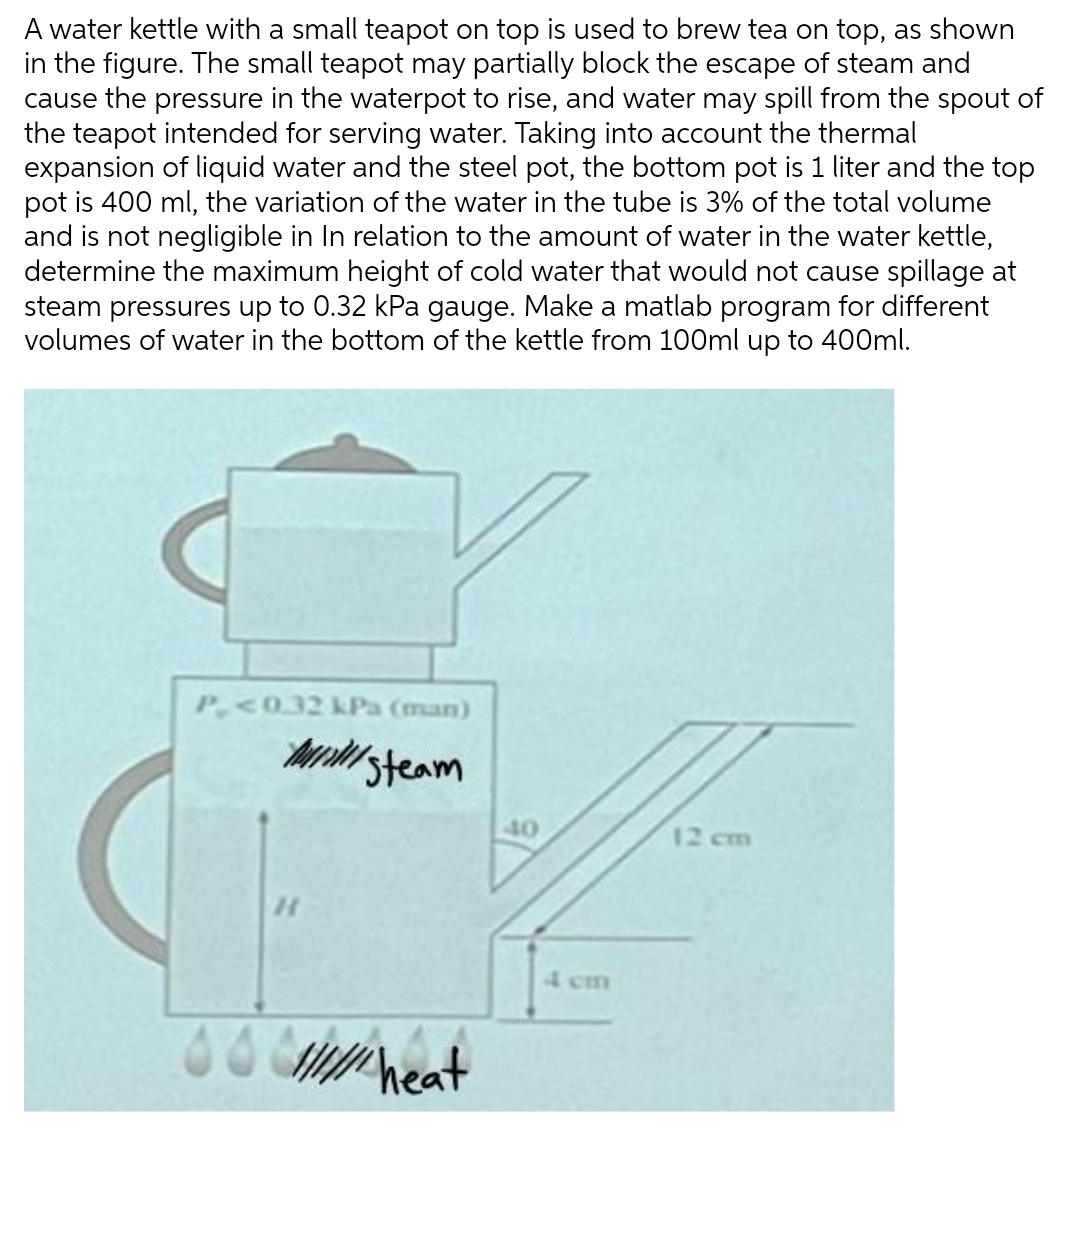 A water kettle with a small teapot on top is used to brew tea on top, as shown
in the figure. The small teapot may partially block the escape of steam and
cause the pressure in the waterpot to rise, and water may spill from the spout of
the teapot intended for serving water. Taking into account the thermal
expansion of liquid water and the steel pot, the bottom pot is 1 liter and the top
pot is 400 ml, the variation of the water in the tube is 3% of the total volume
and is not negligible in In relation to the amount of water in the water kettle,
determine the maximum height of cold water that would not cause spillage at
steam pressures up to 0.32 kPa gauge. Make a matlab program for different
volumes of water in the bottom of the kettle from 100ml up to 400ml.
P<0.32 kPa (man)
MINI
Steam
12 cm
so///// heat
40